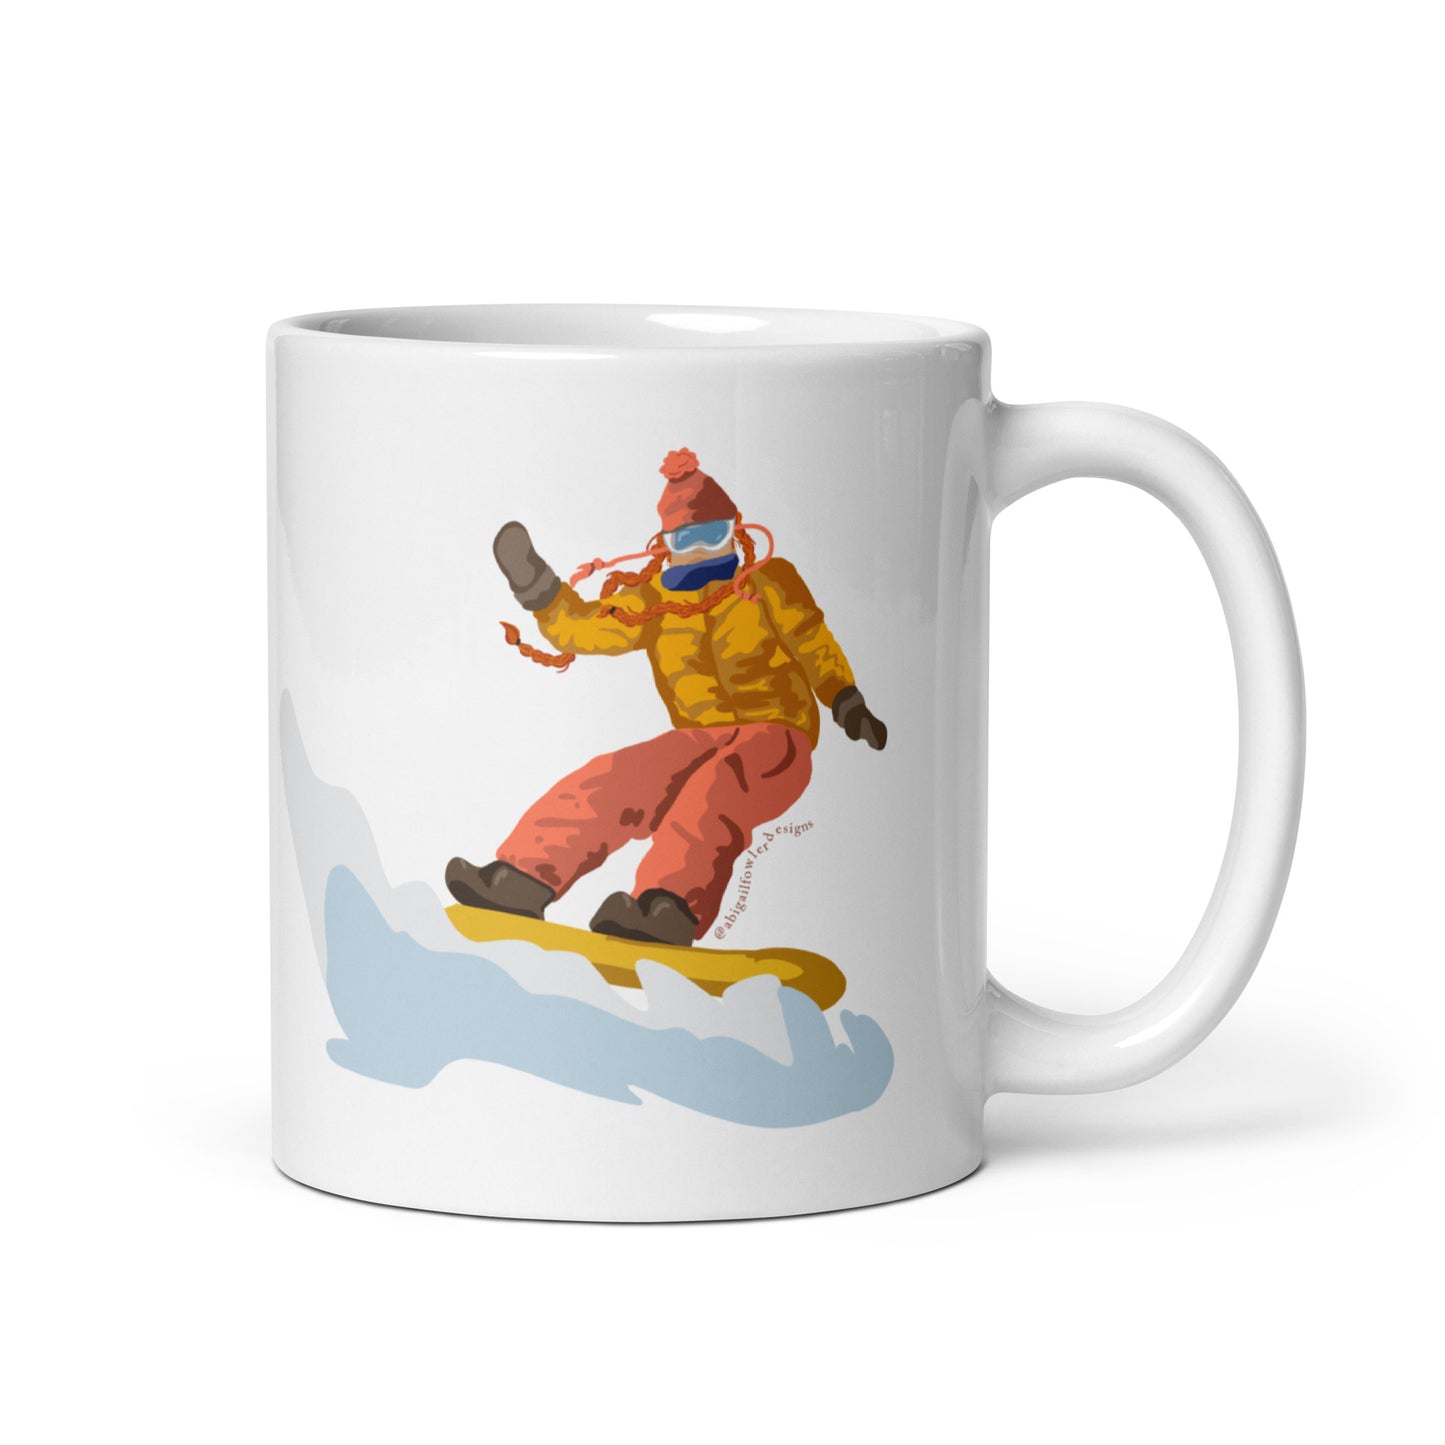 Tan and Red Head in Braids Snowboarder White glossy mug